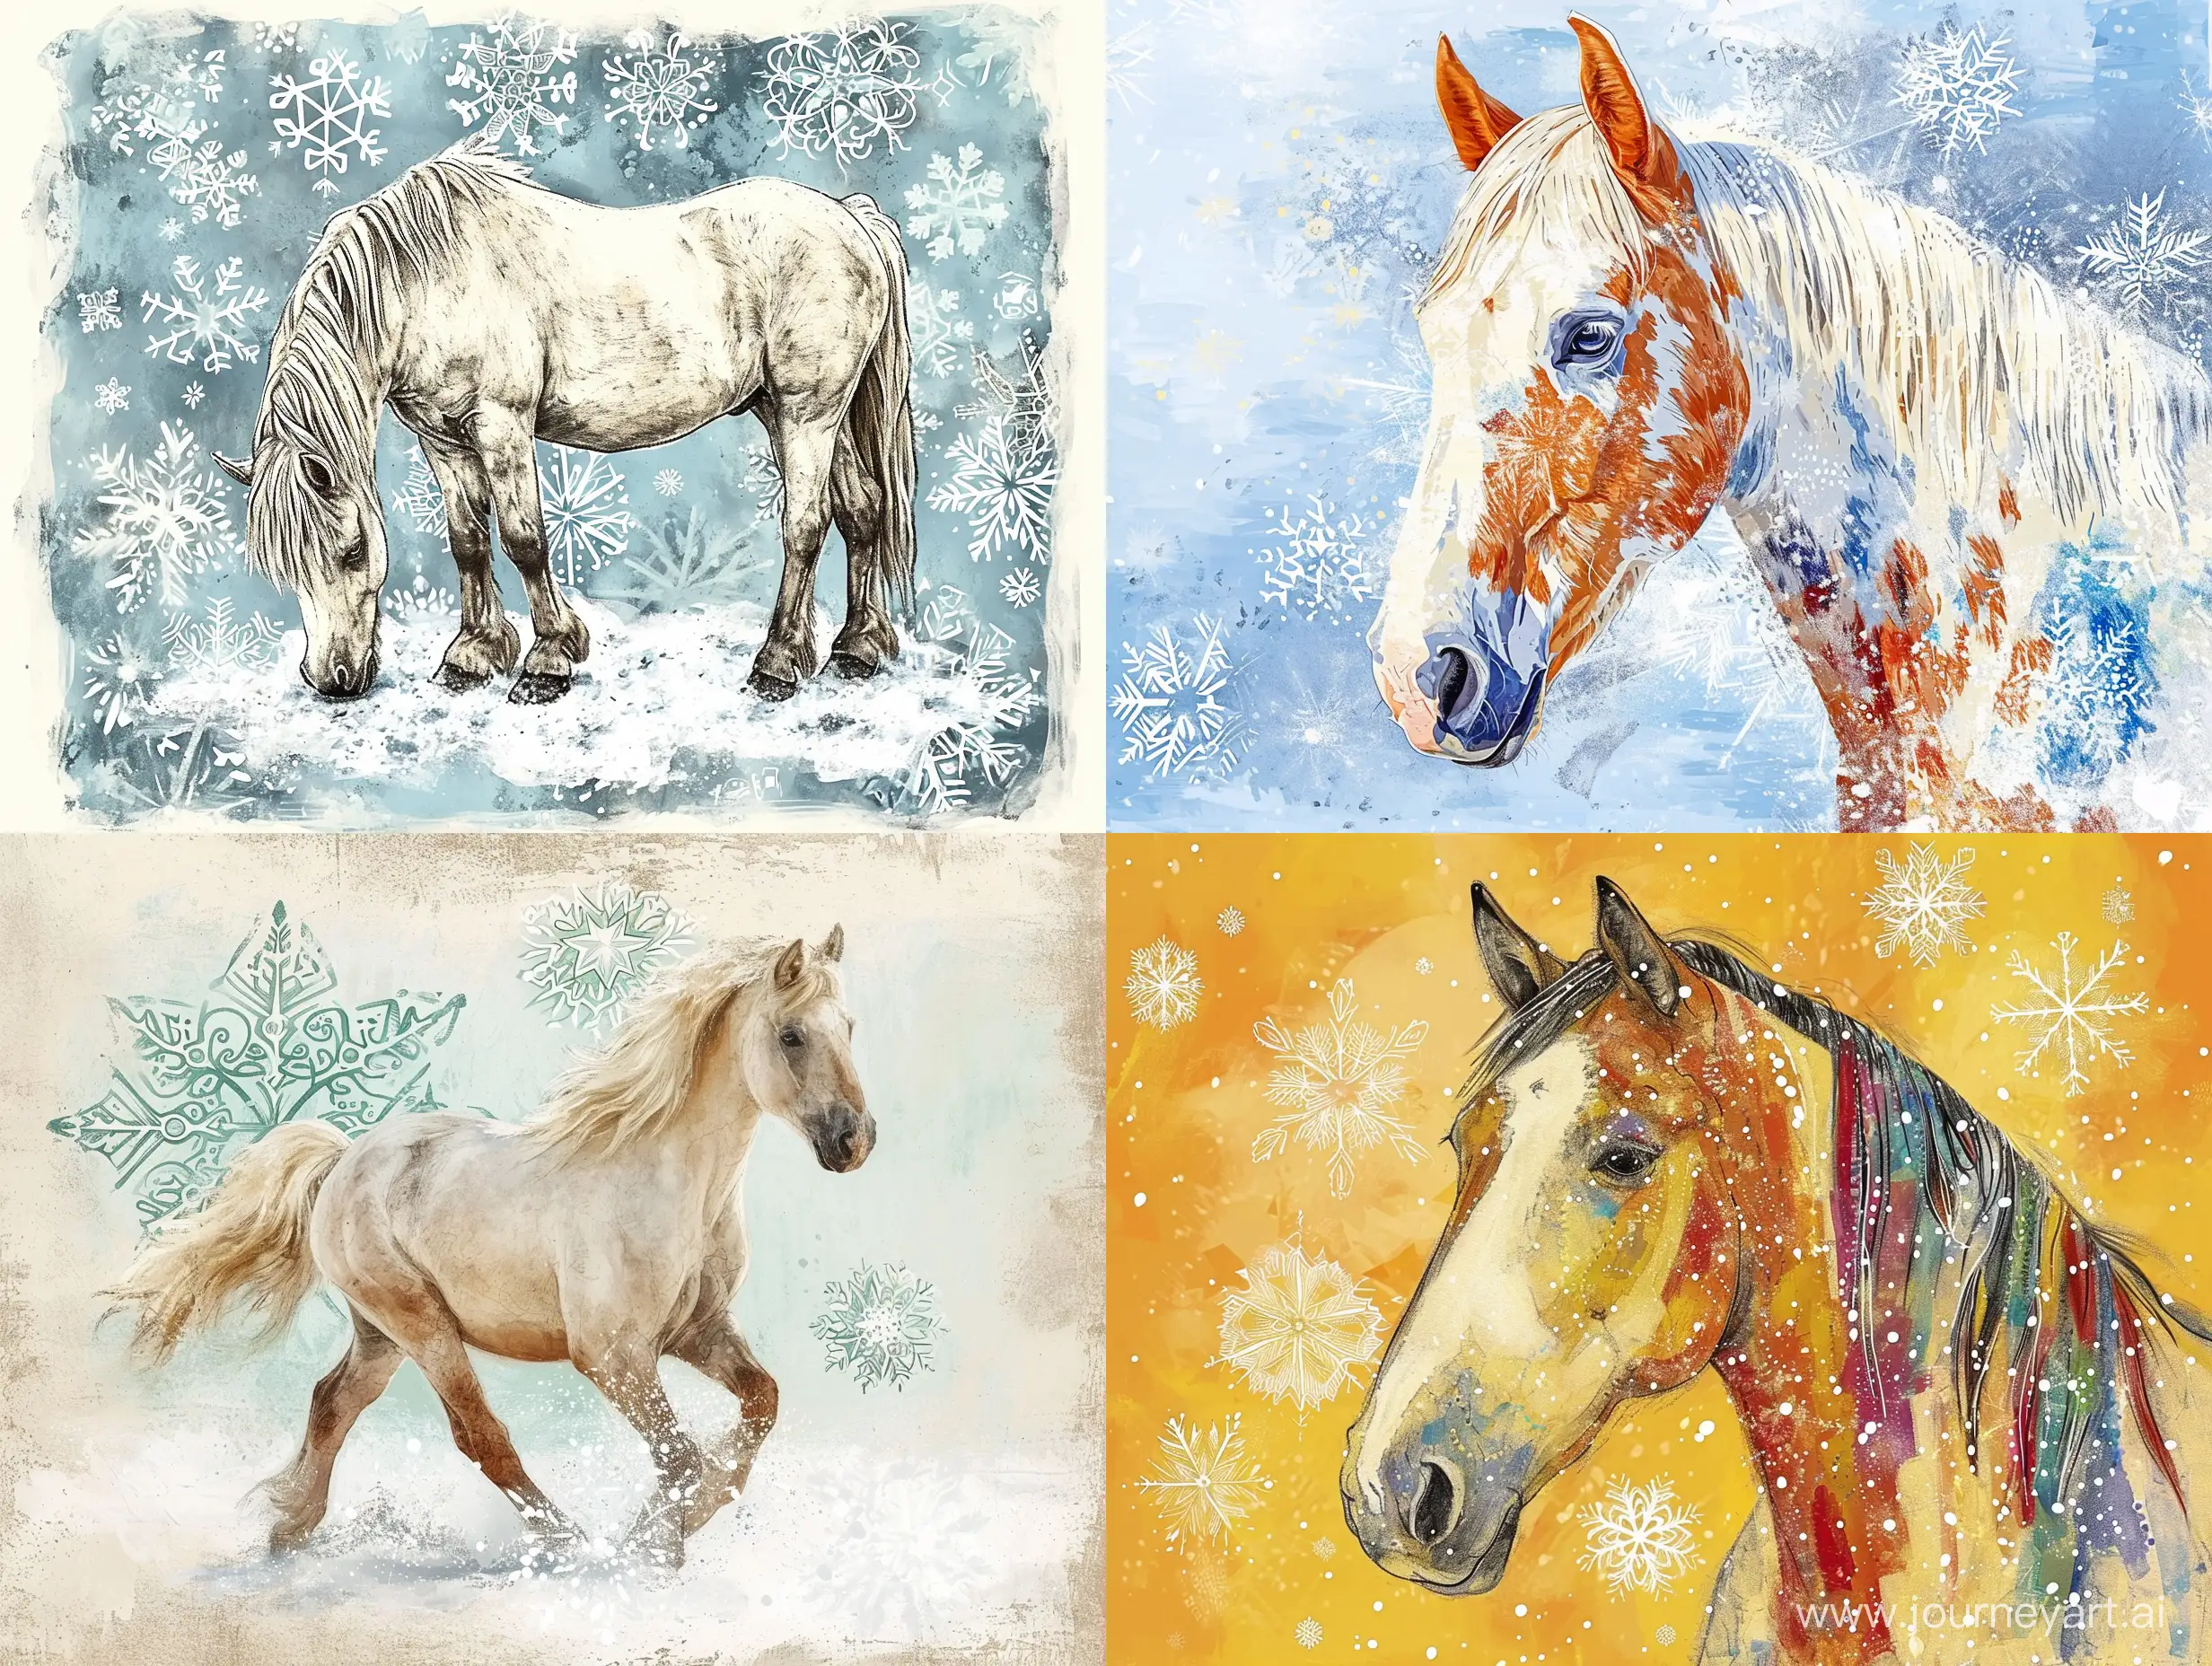 Charming-Childlike-Drawing-Whimsical-Horse-Amidst-Snowflakes-in-Serenity-Background